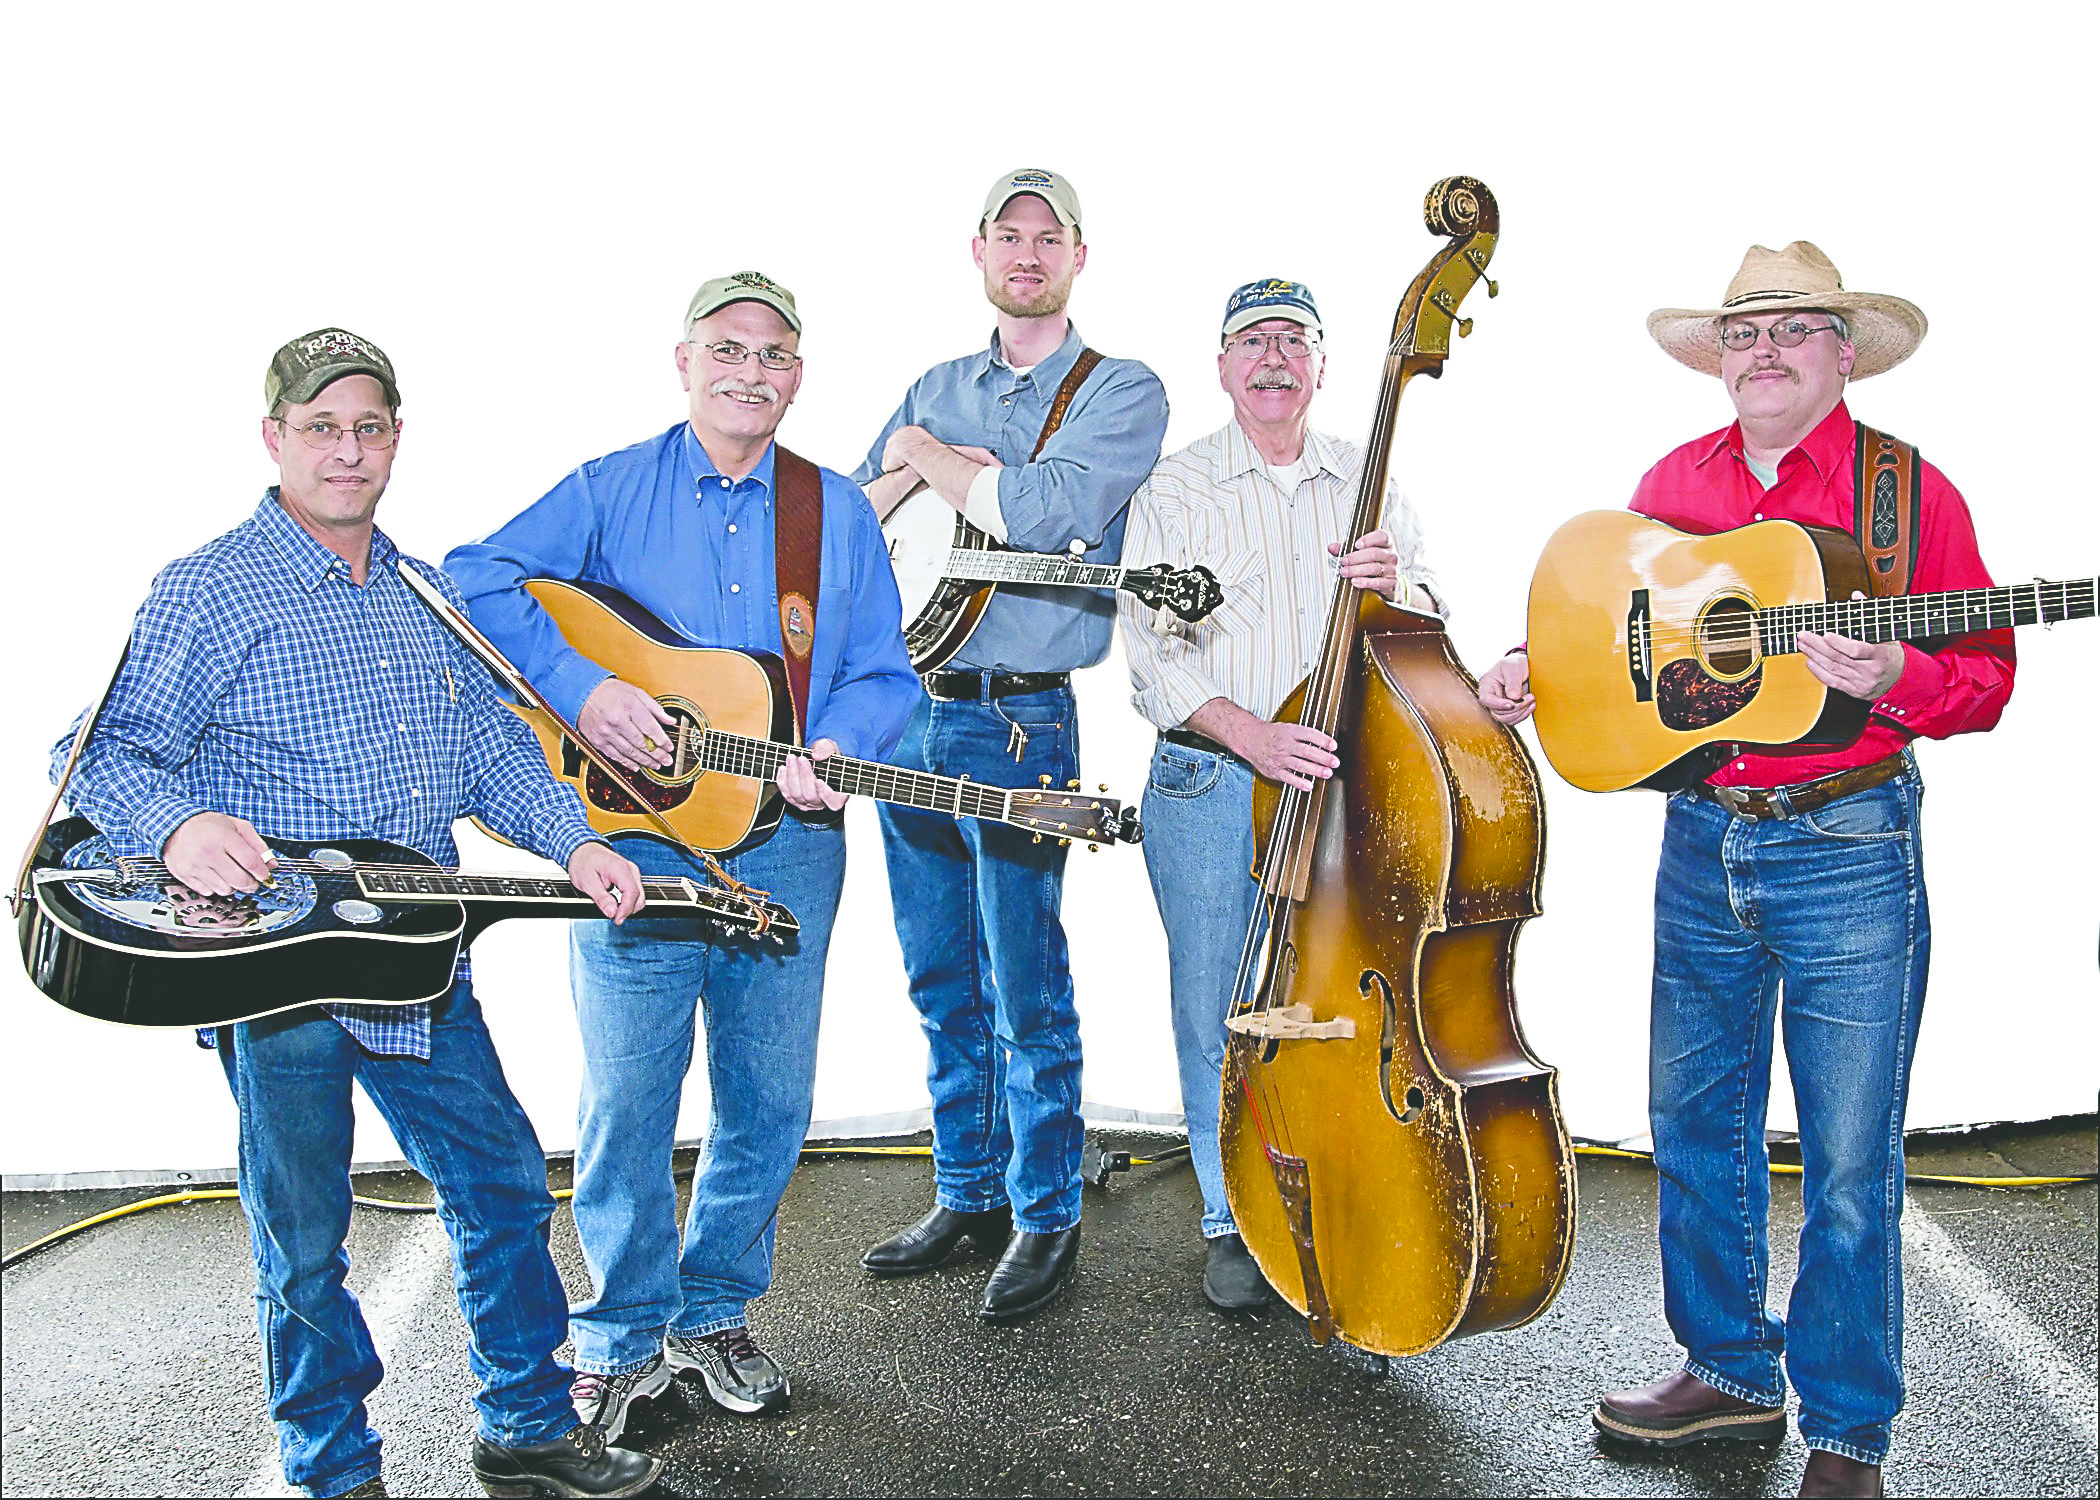 Prairie Flyer will bring bluegrass and other American music to three Sequim-area venues this weekend. The band is